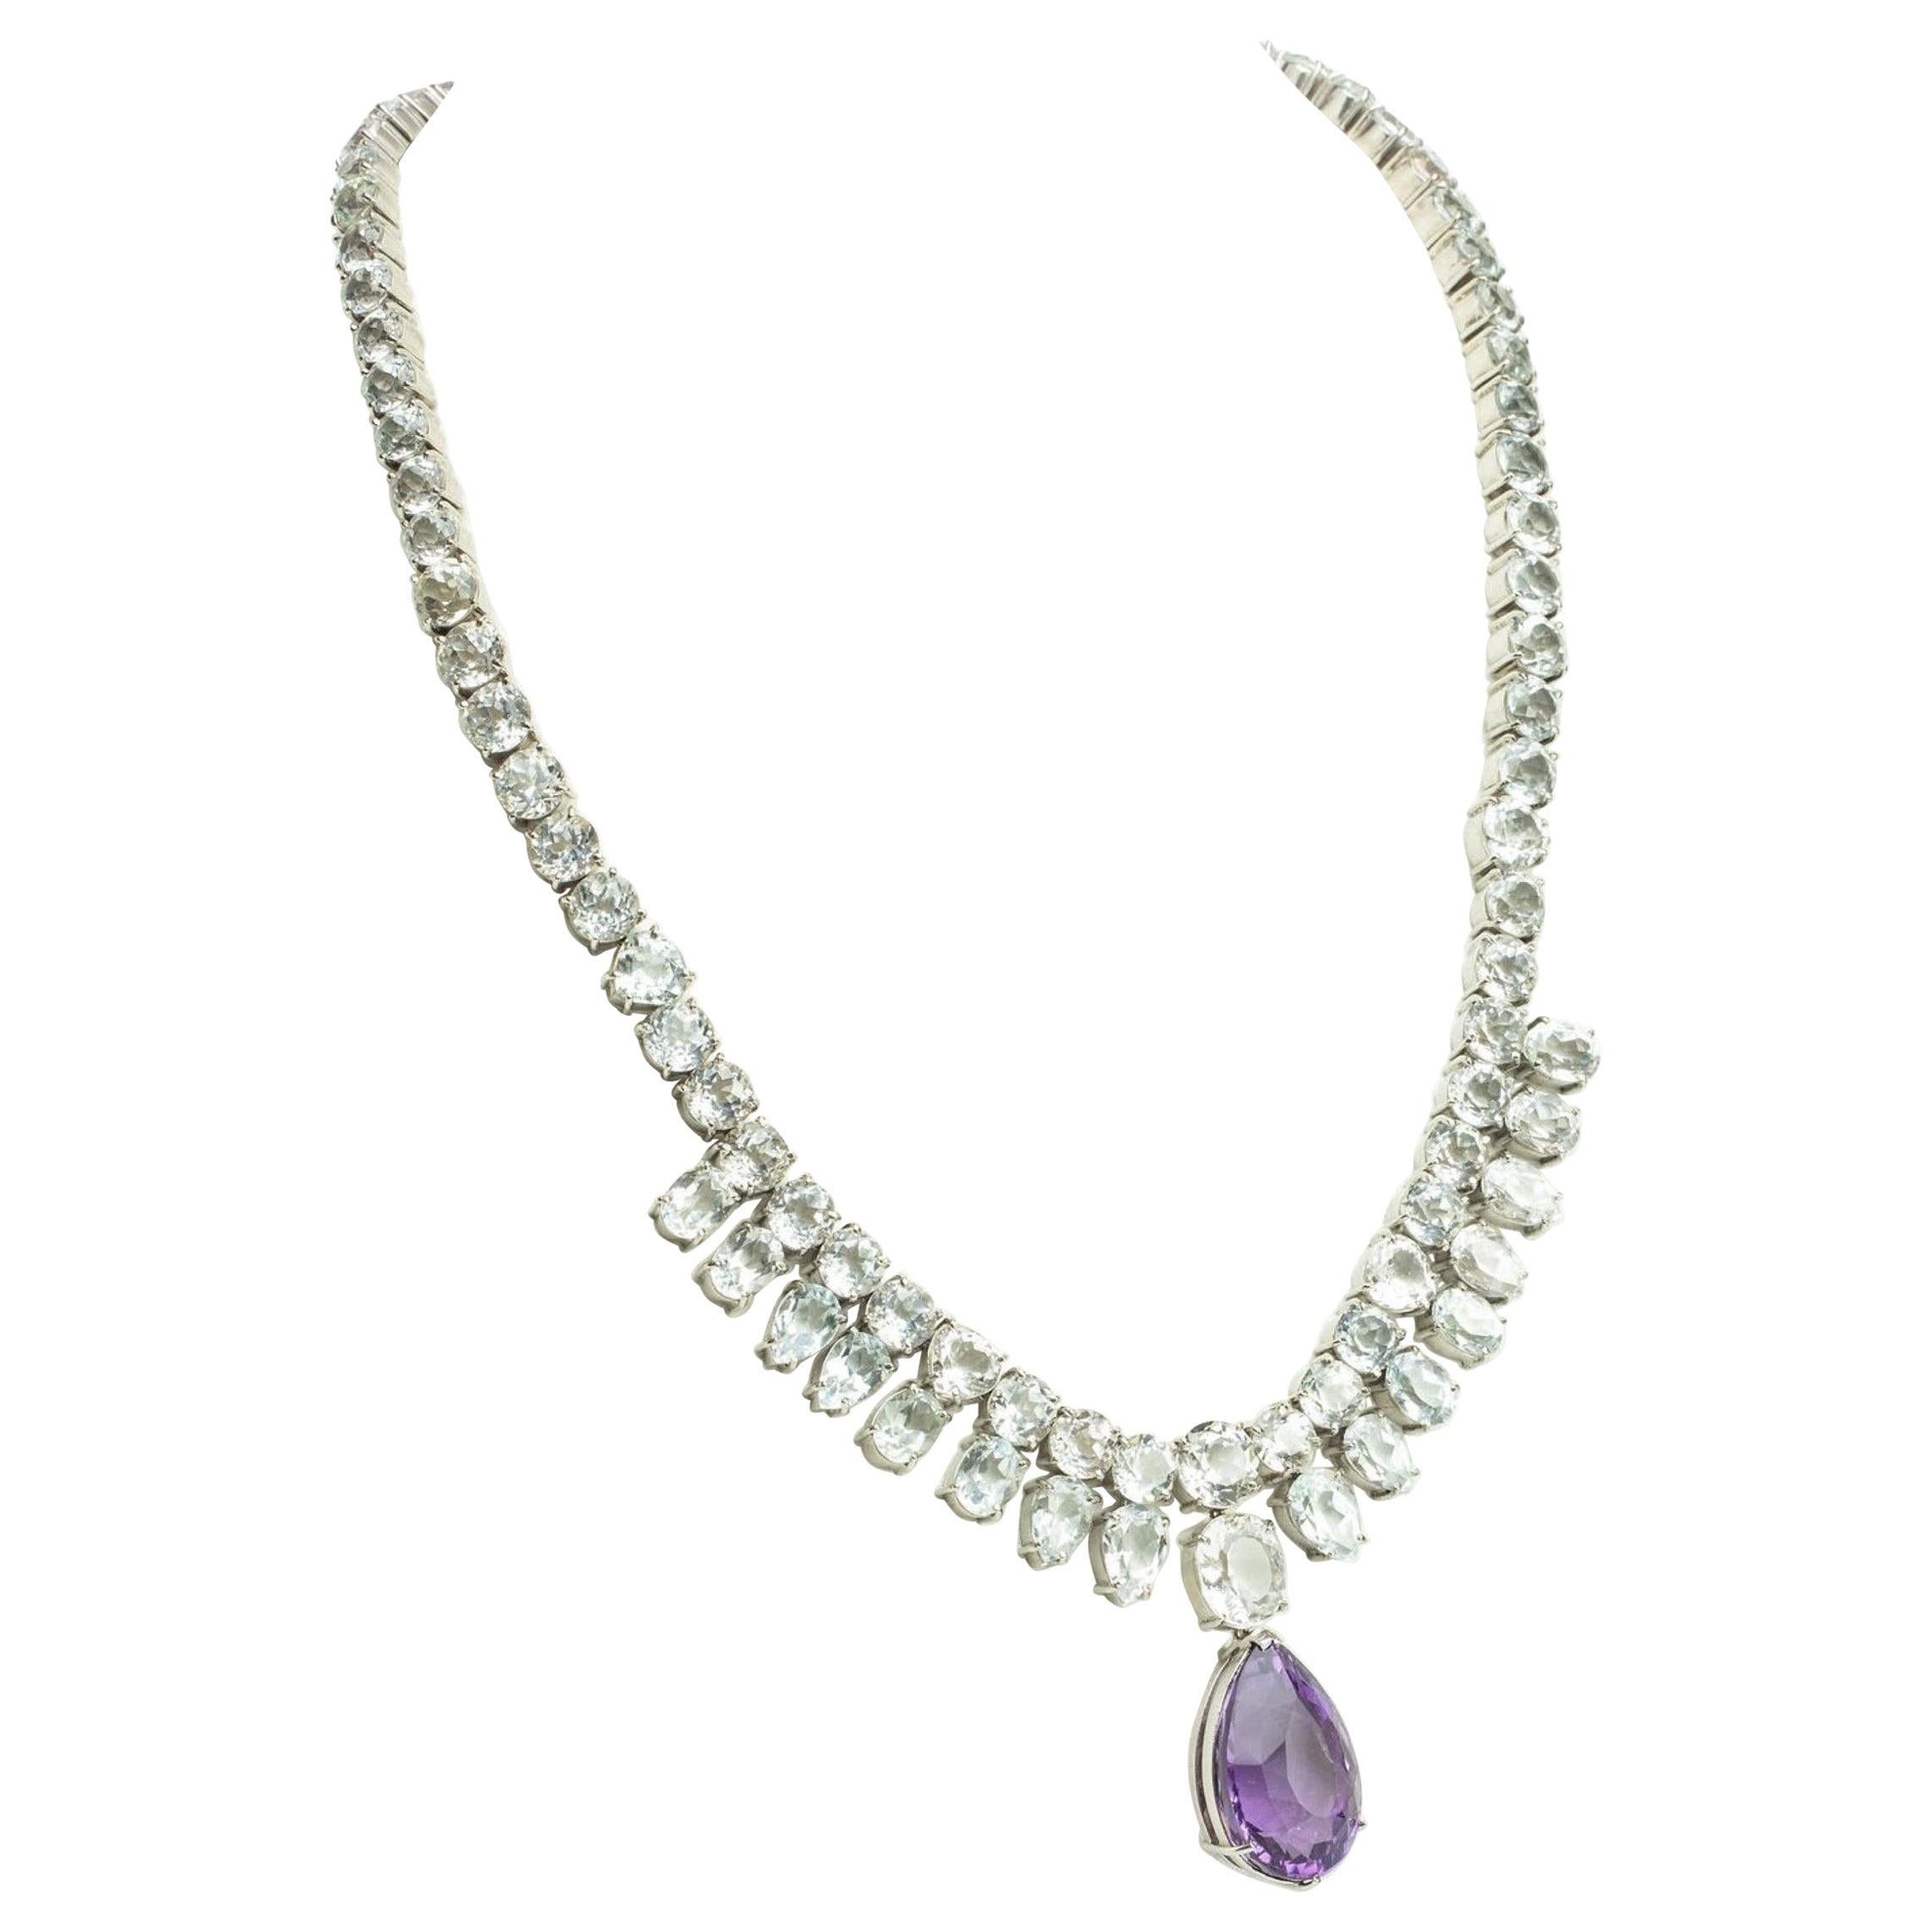 10ct Pear Cut Amethyst and Topaz Necklace For Sale